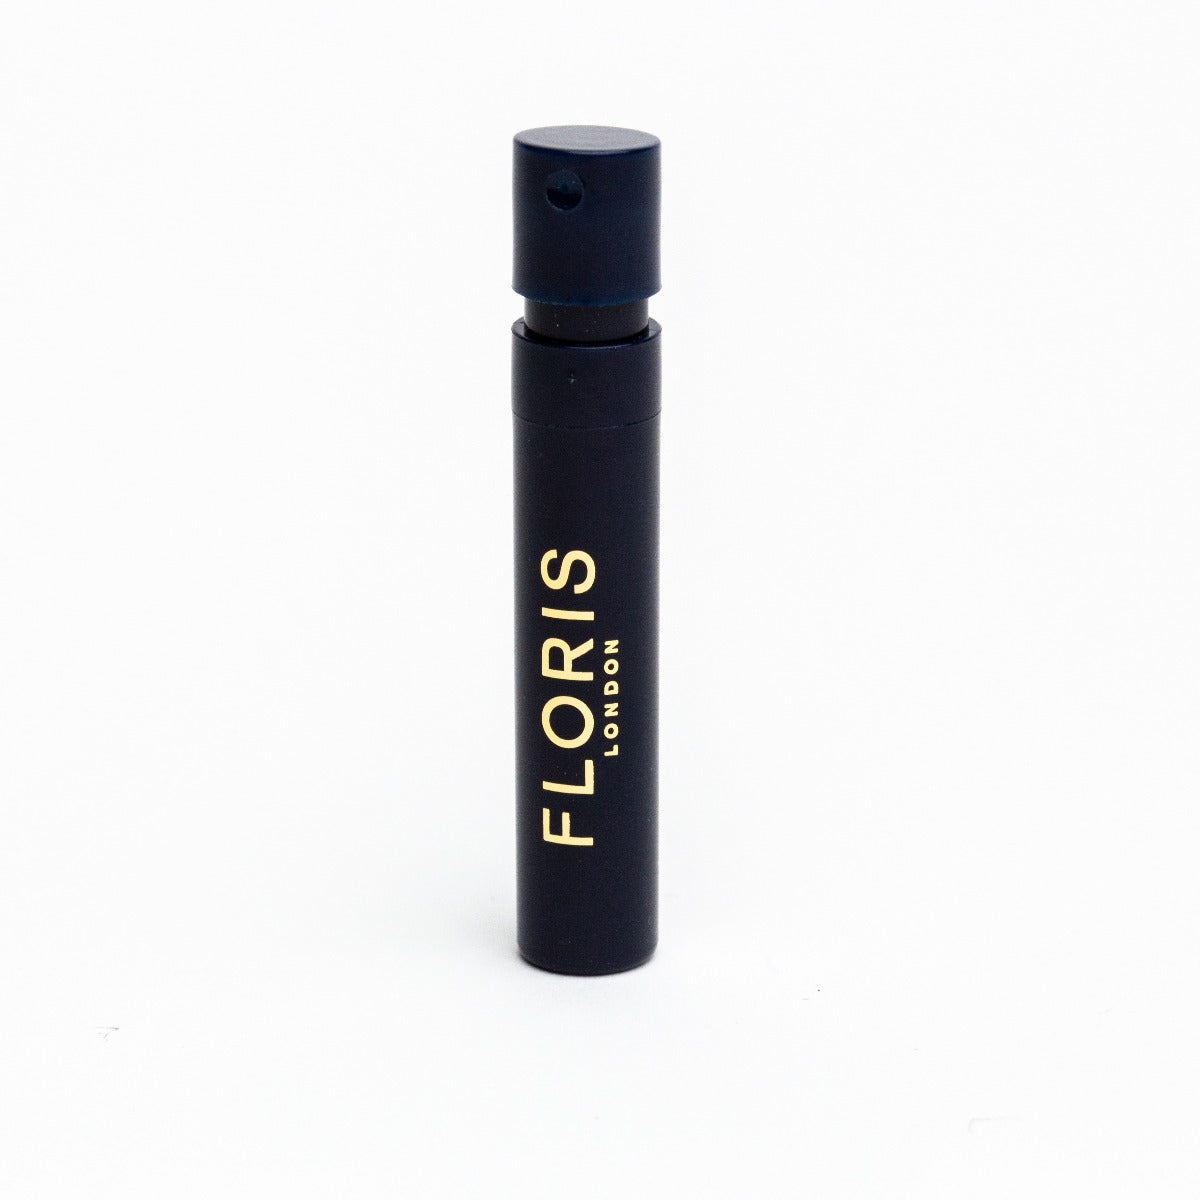 A black bottle with the word KirbyAllison.com on it, containing FLORIS JF EDT Sample Vial fragrance samples.